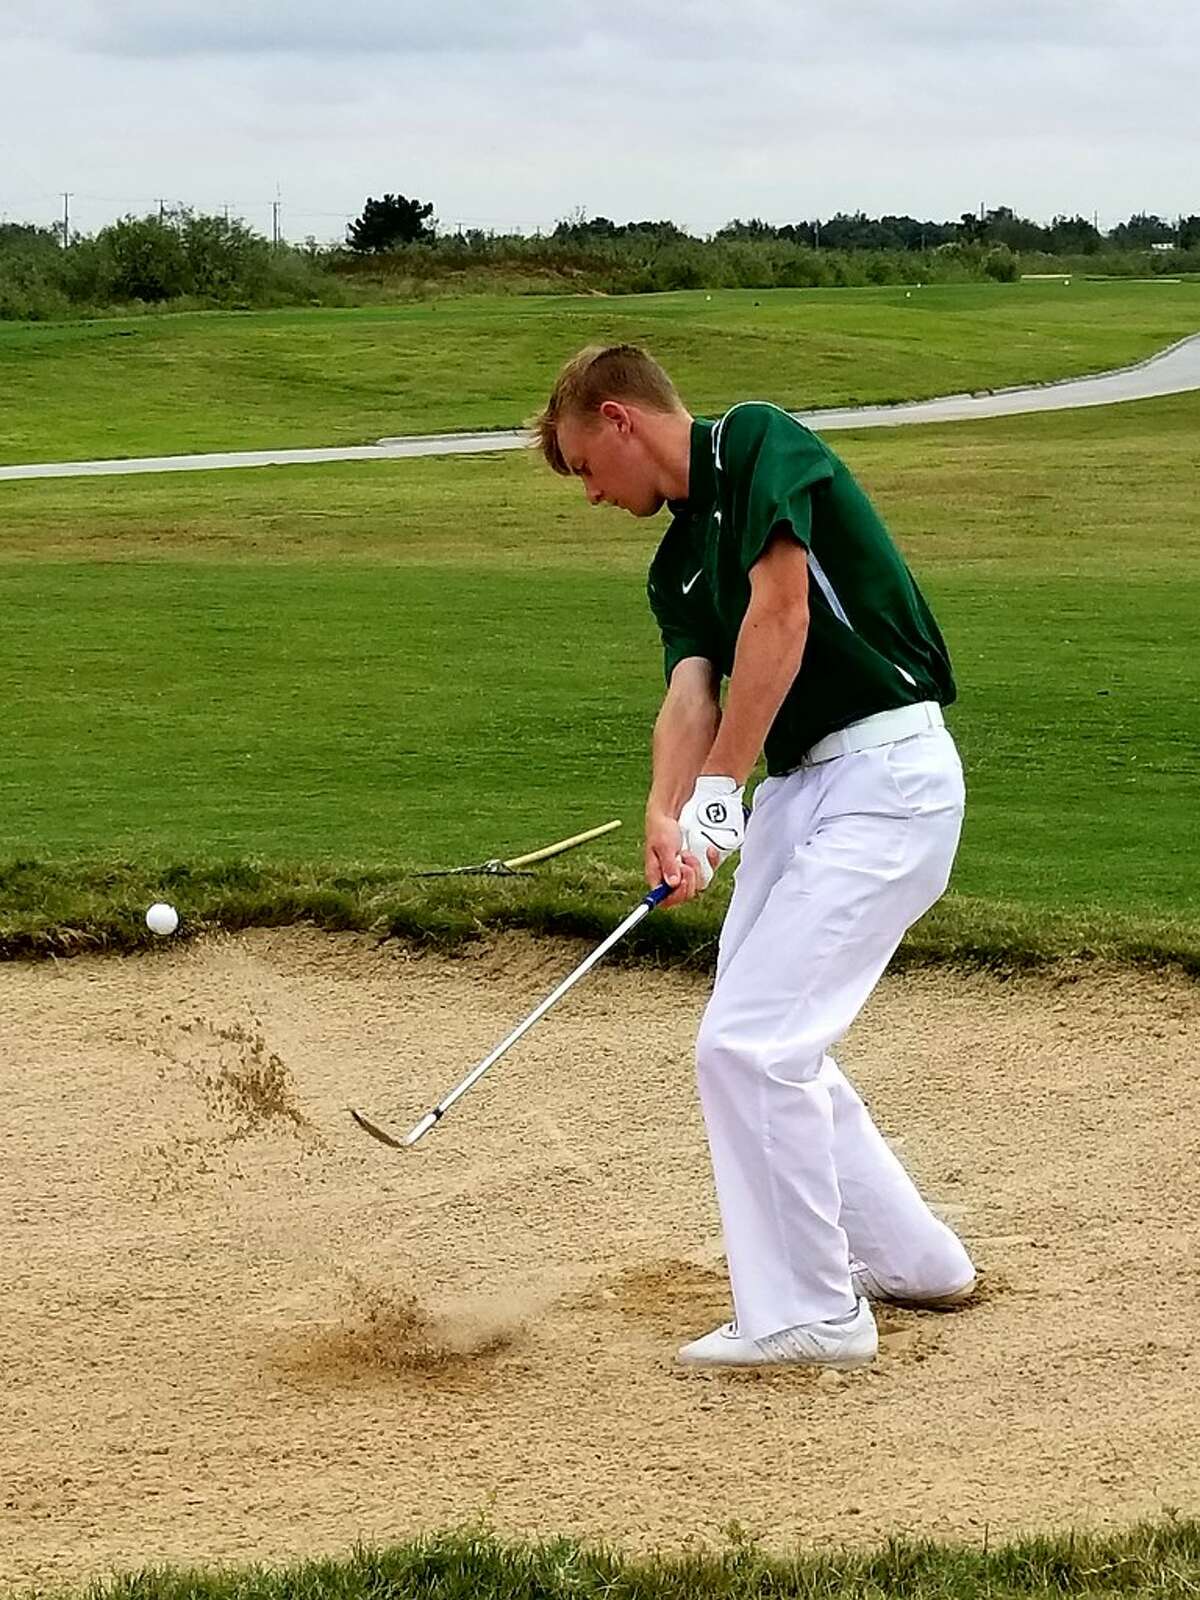 Midland College's Callum Bruce hits a bunker shot during the first round of the NJCAA Division I National Previews Tournament at The Rawls Course in Lubbock on Monday. Courtesy photo